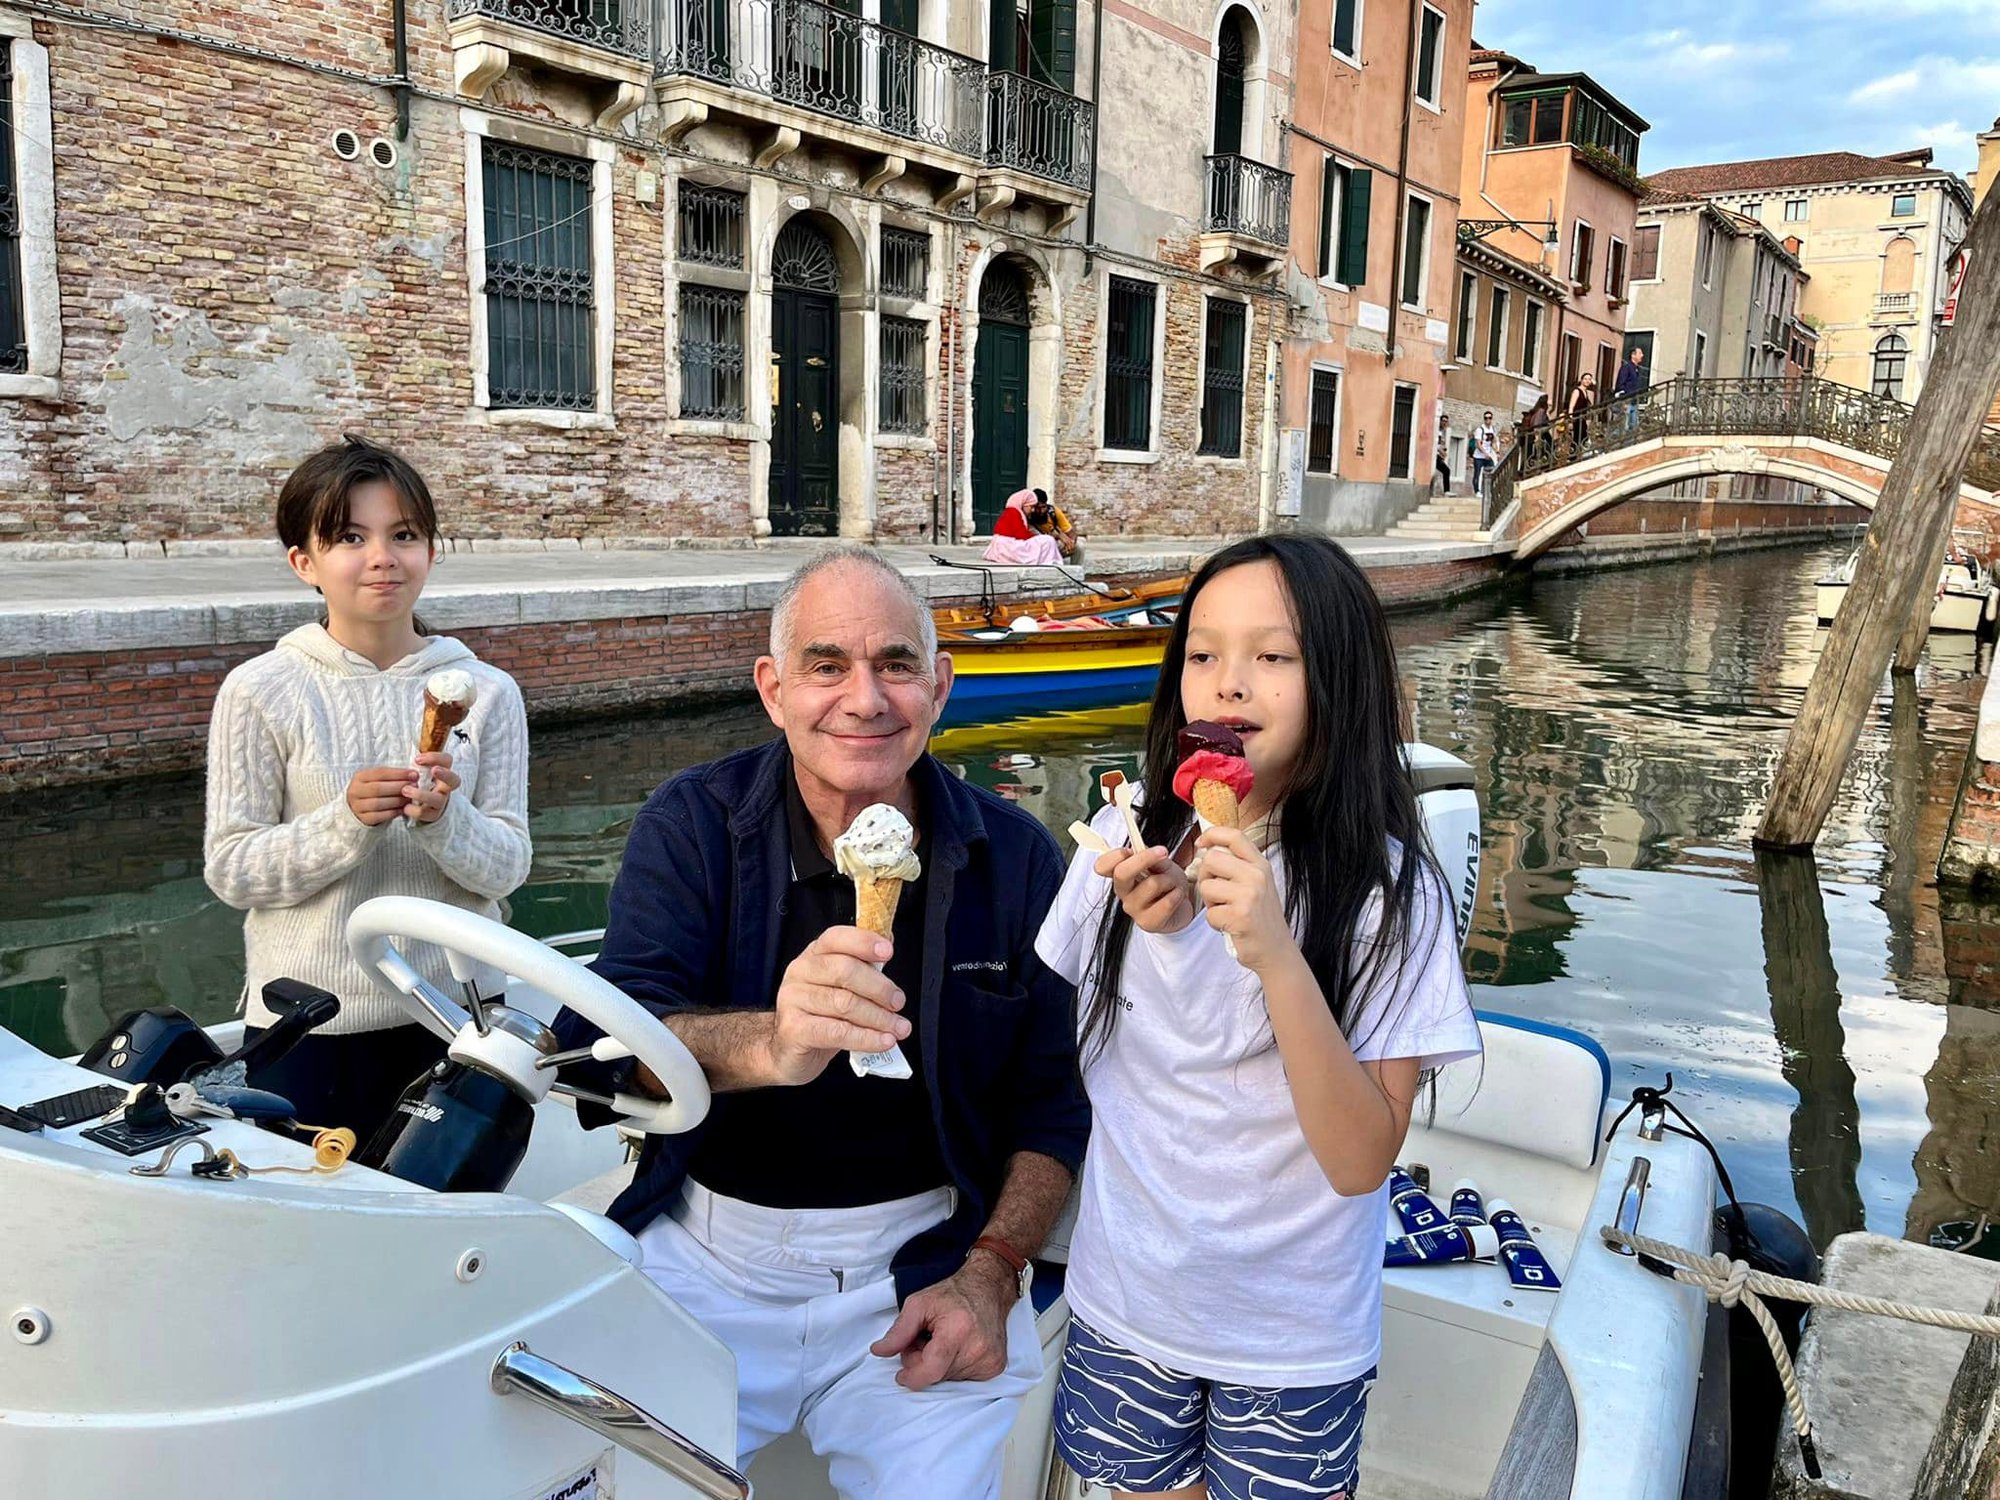 Vietnamese stars for gentlemen and girls to have an early summer vacation: Cuong Do La takes his daughter on a luxurious trip, Do Manh Cuong is even more majestic - Photo 6.